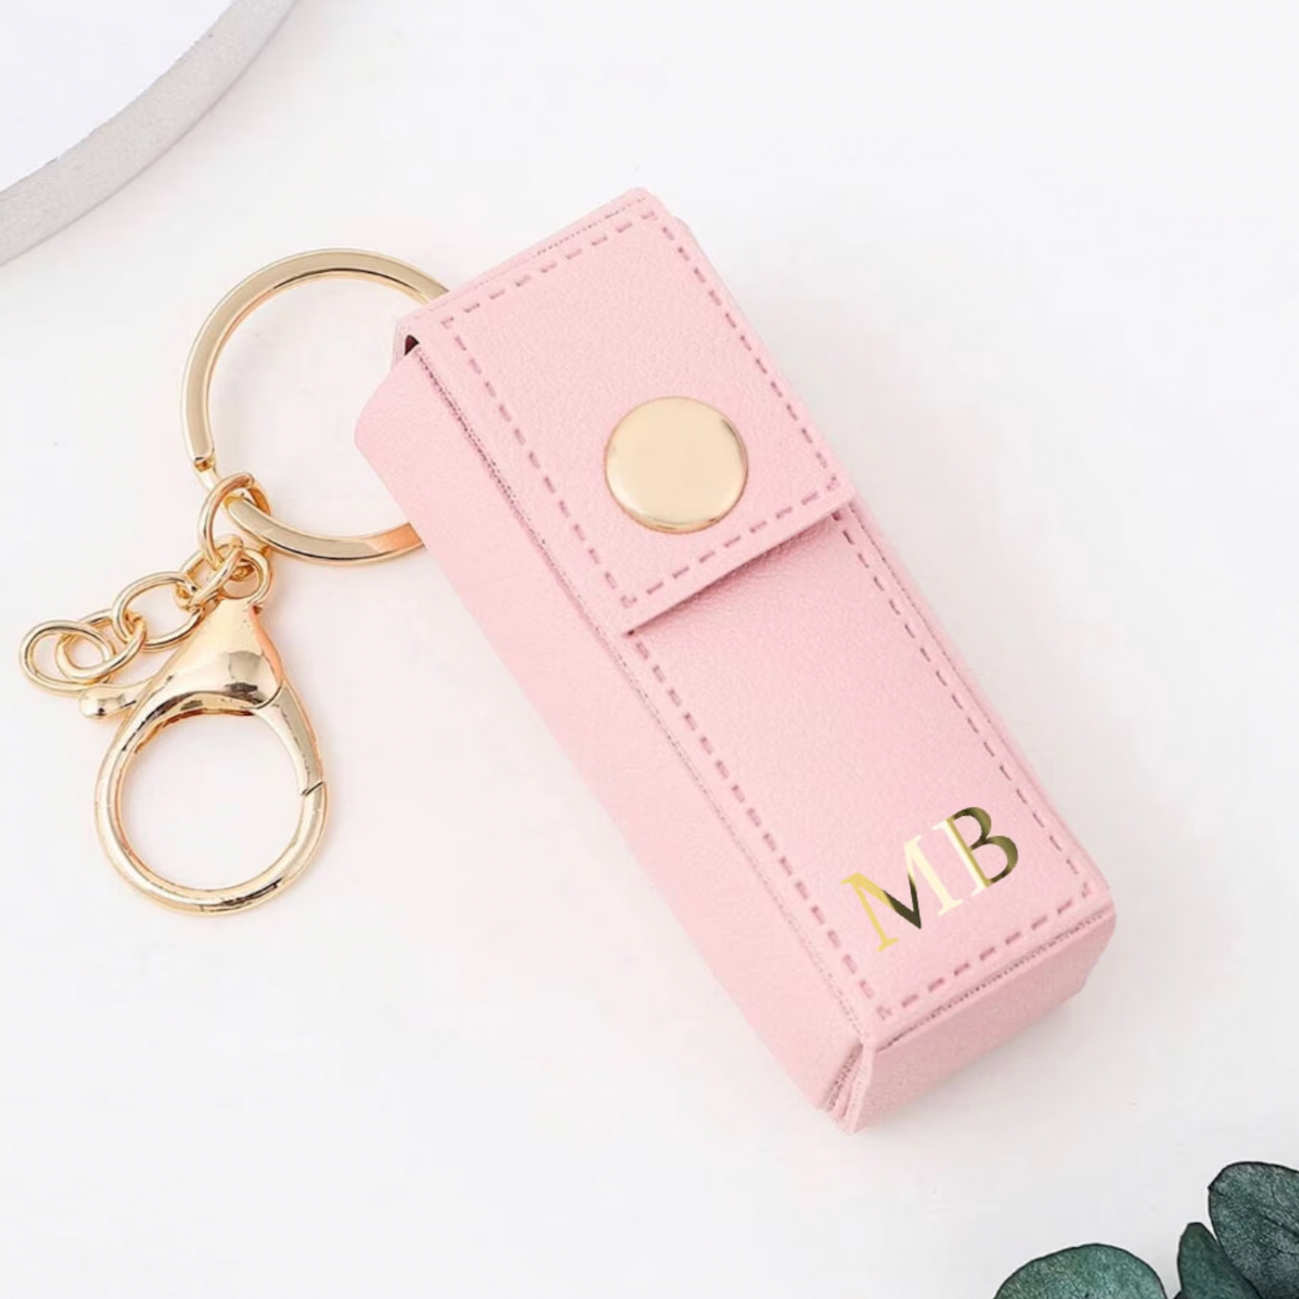 Personalised Faux Leather Lipstick Holder Lip Balm Keychain Bag Charm